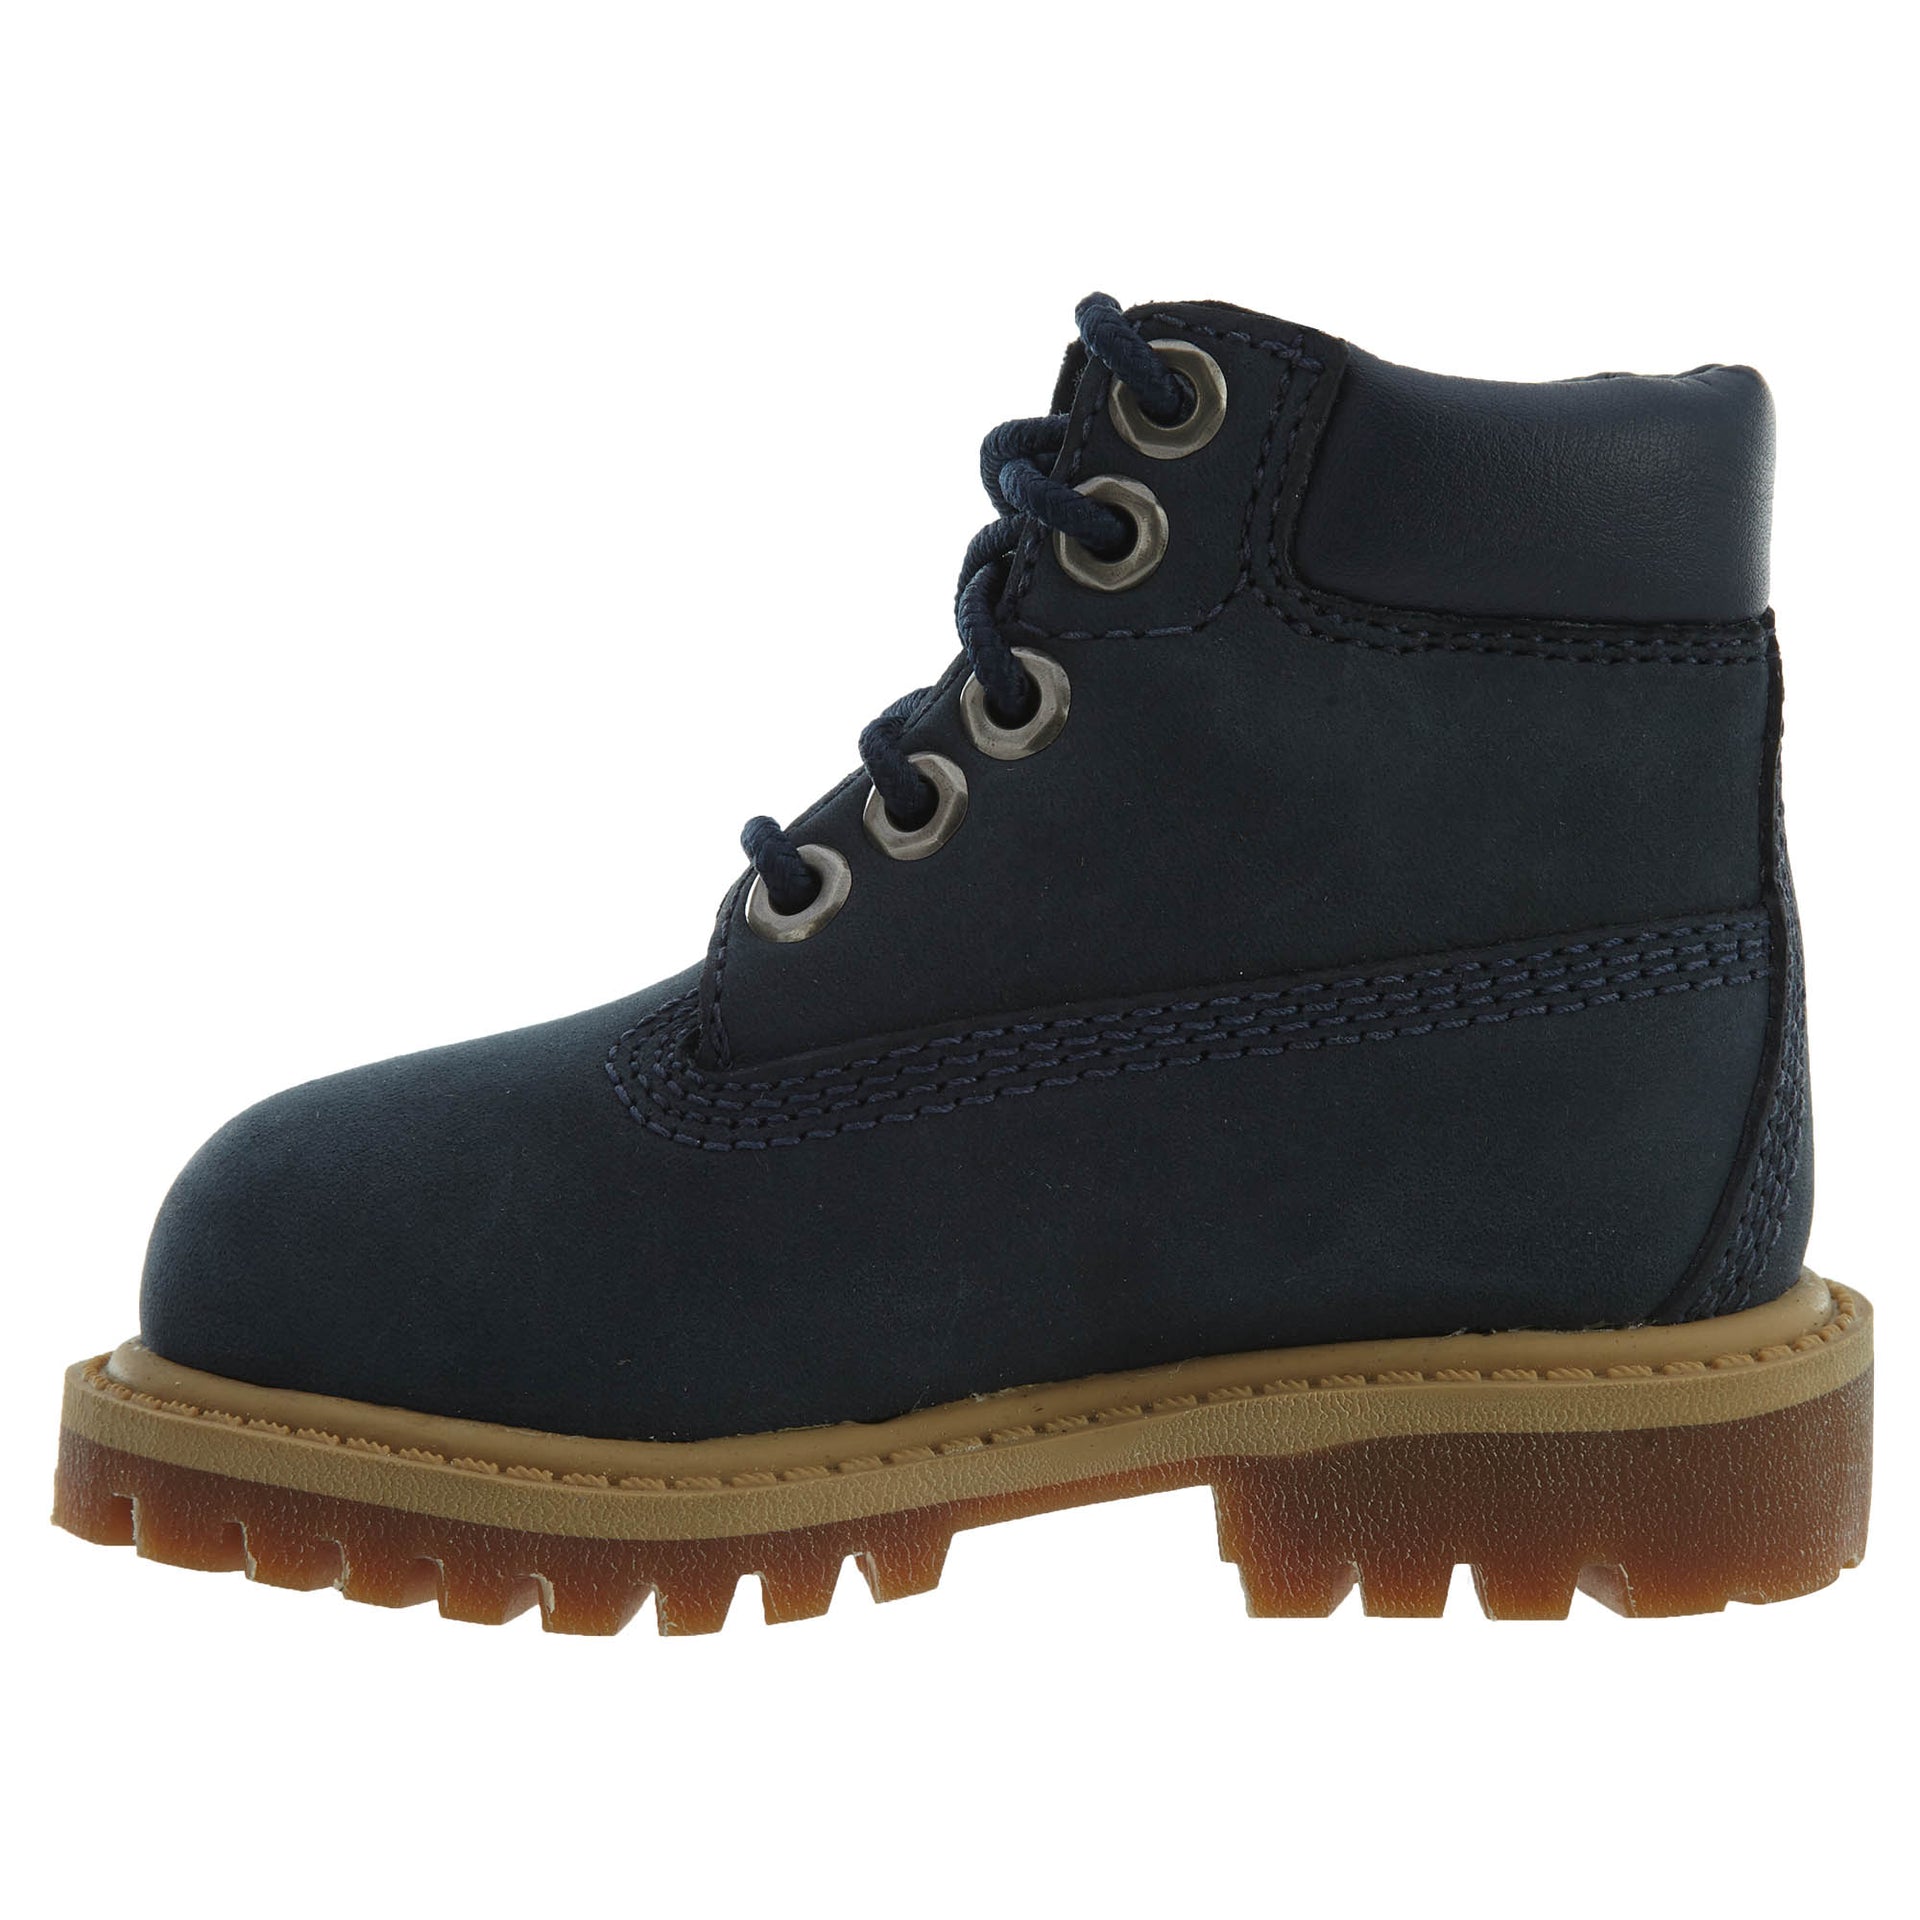 Timberland 6" Premium Boot   Toddlers Style : Tb09487r